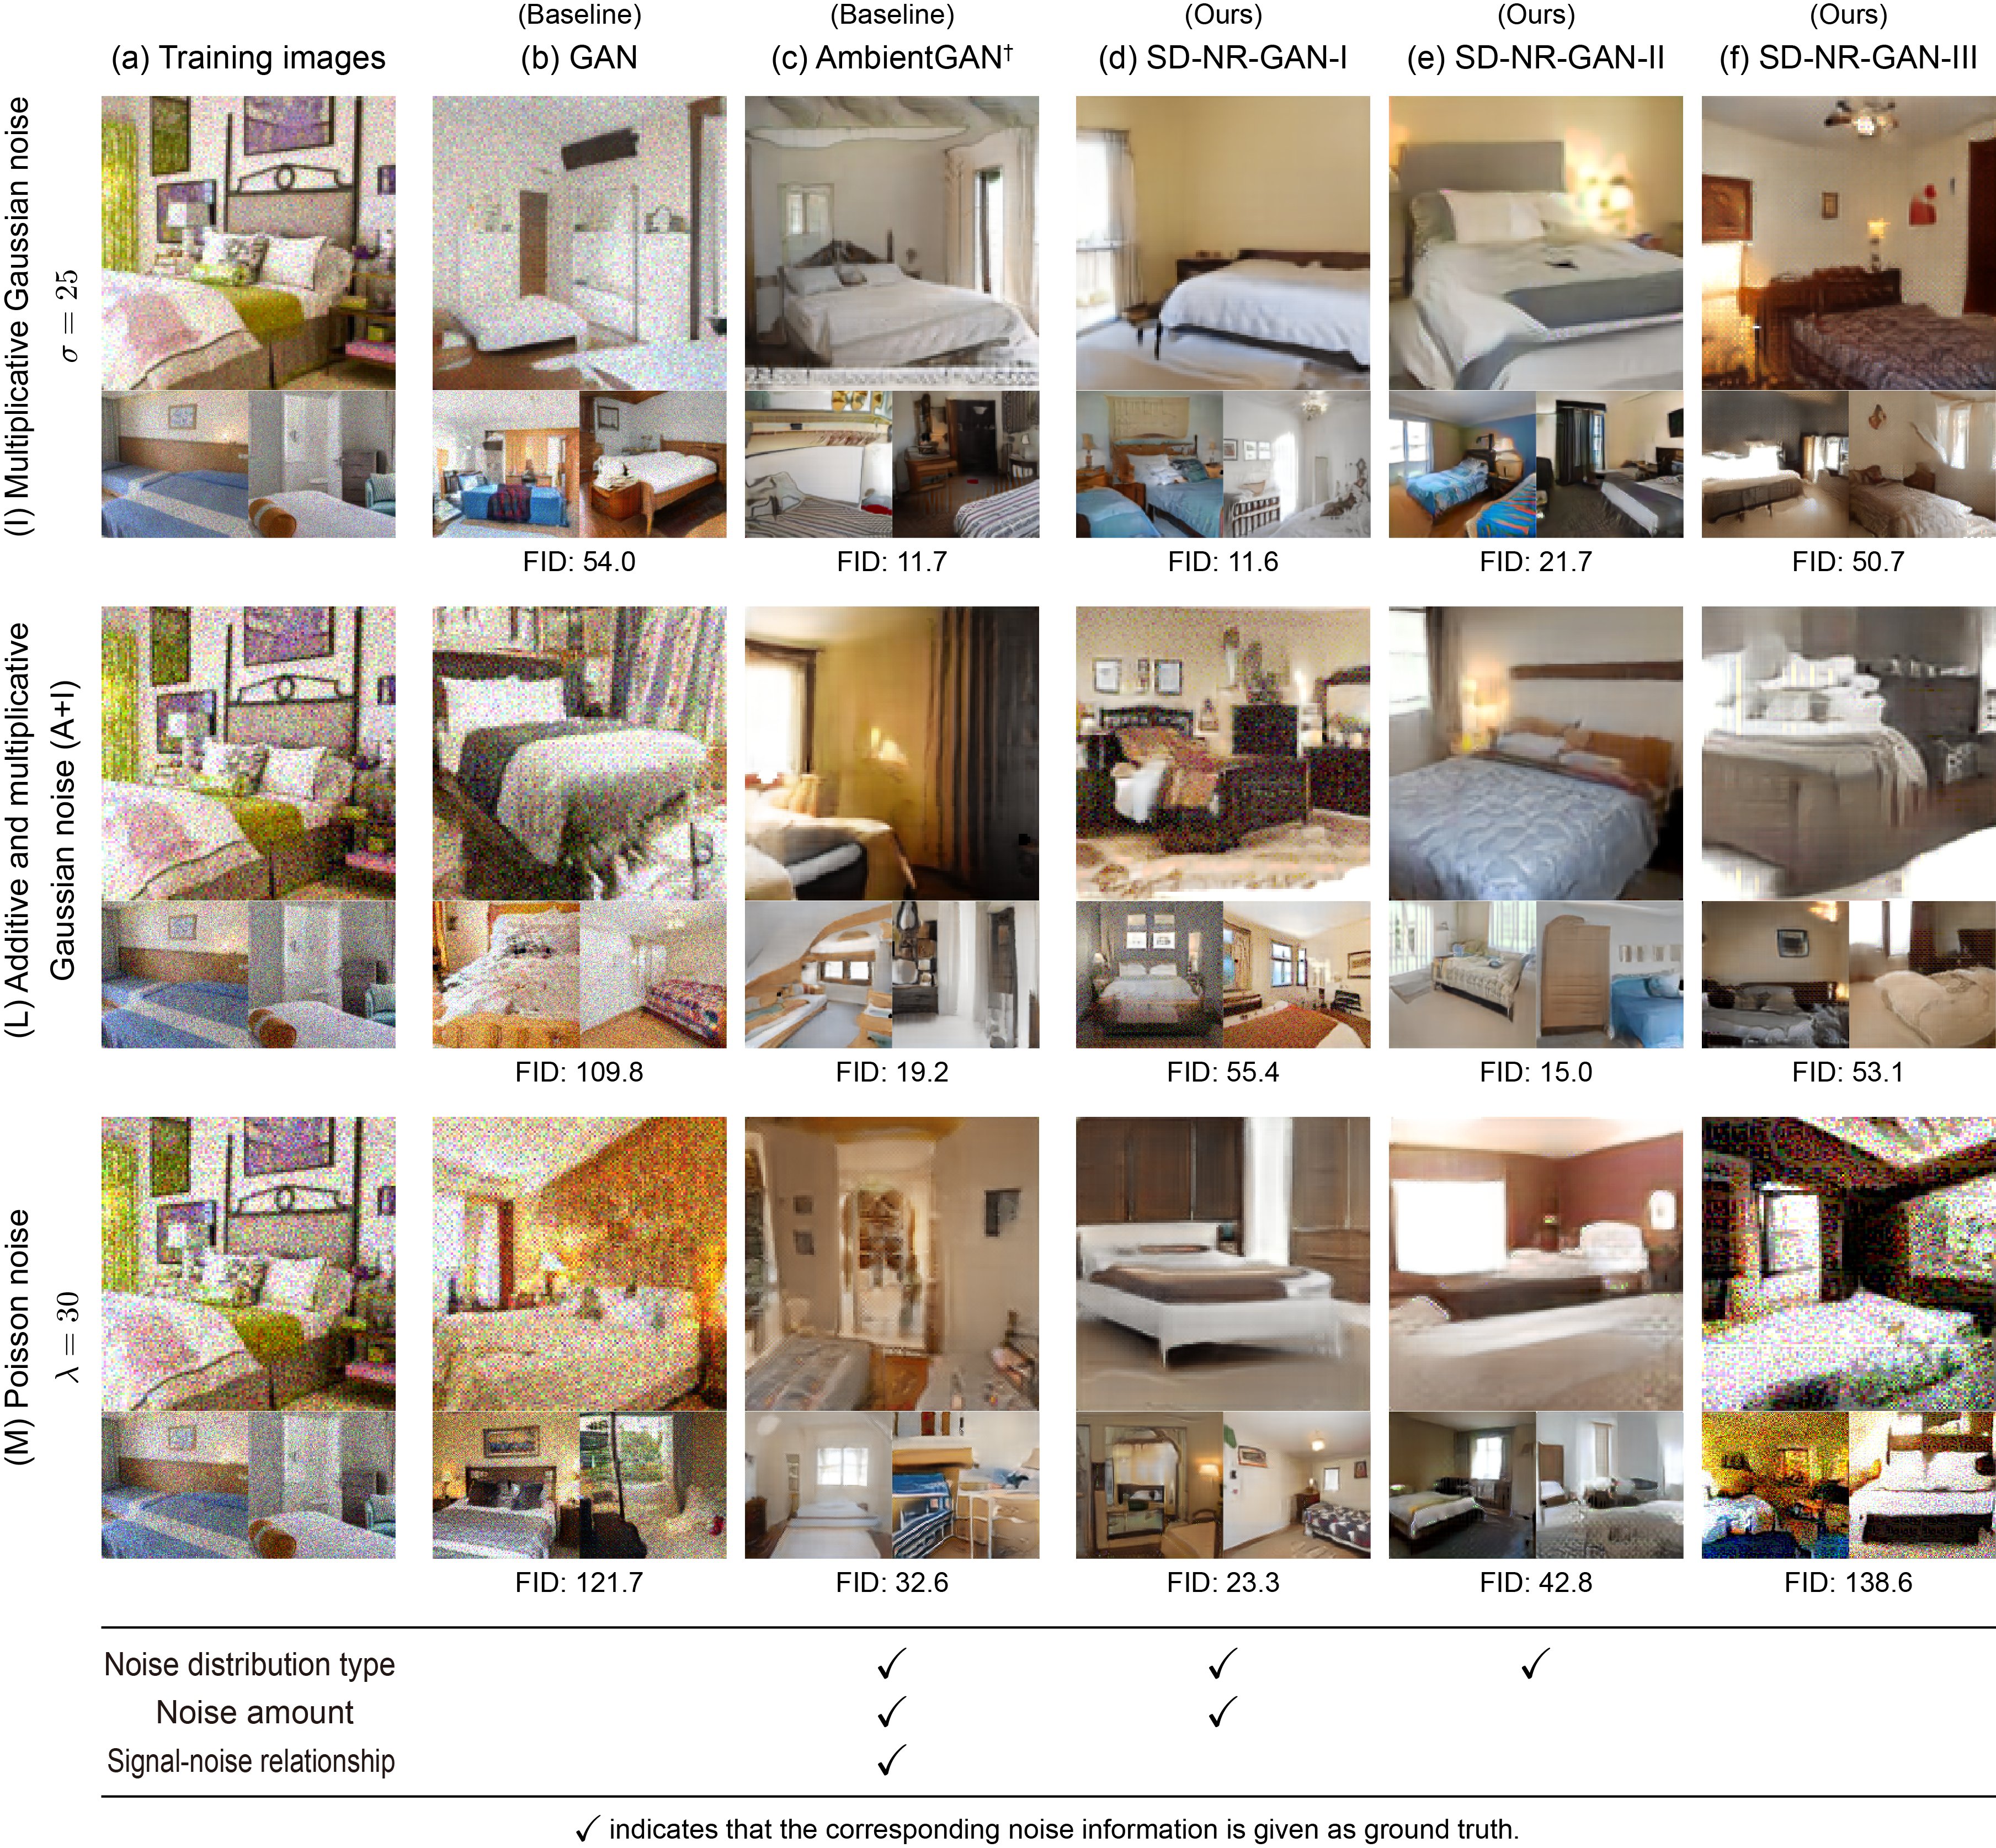 Examples of generated images on LSUN Bedroom with signal-dependent noises